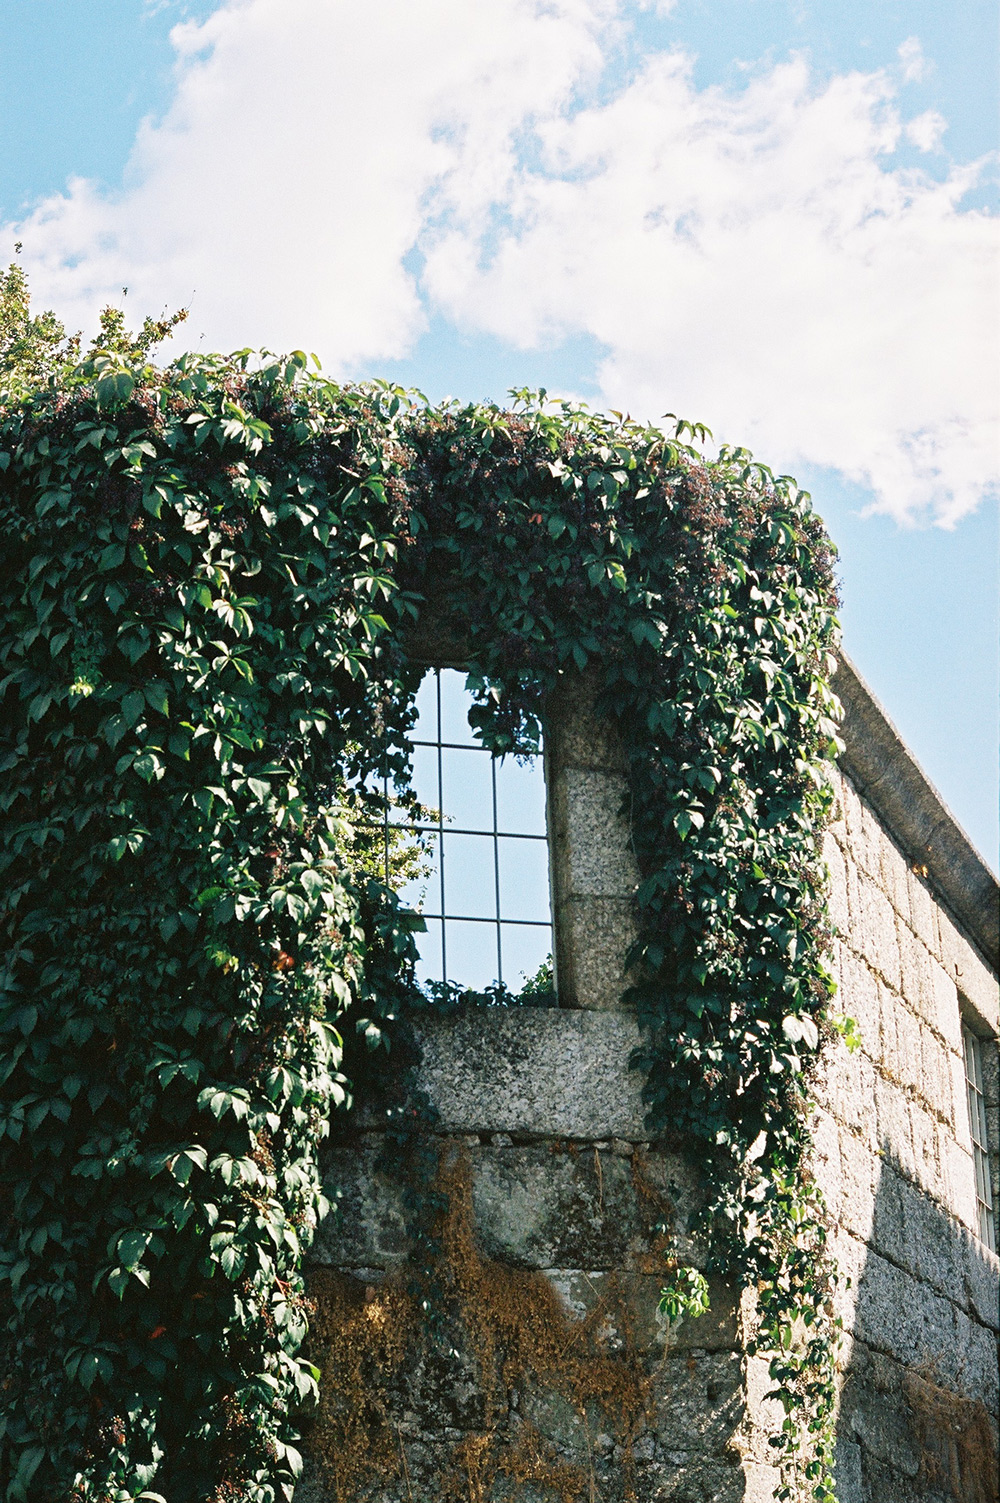 Analog photo of a window on a stone wall with vegetation.